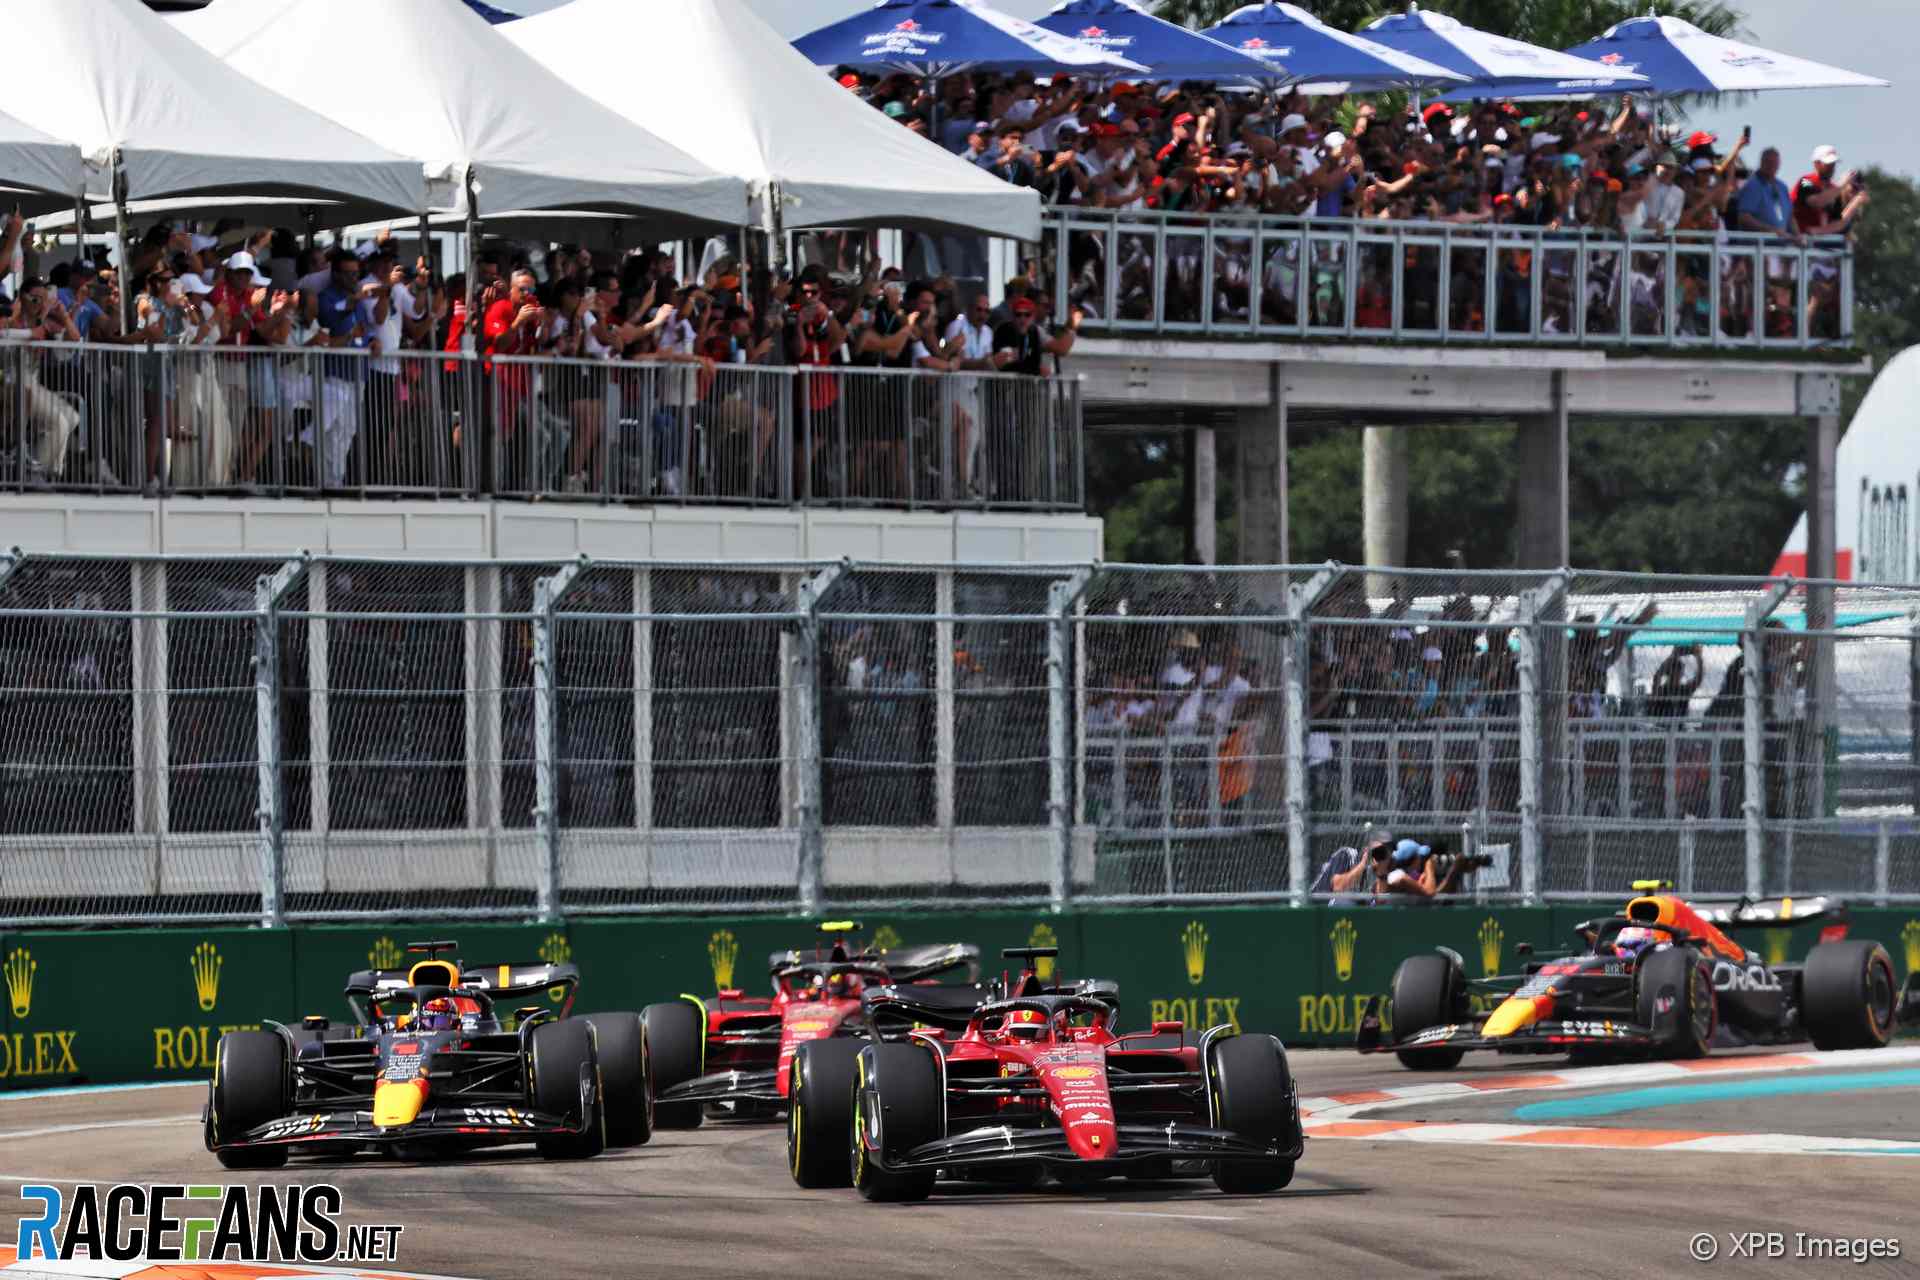 The 2022 Miami Grand Prix was held at Miami International Autodrome and won by Max Verstappen